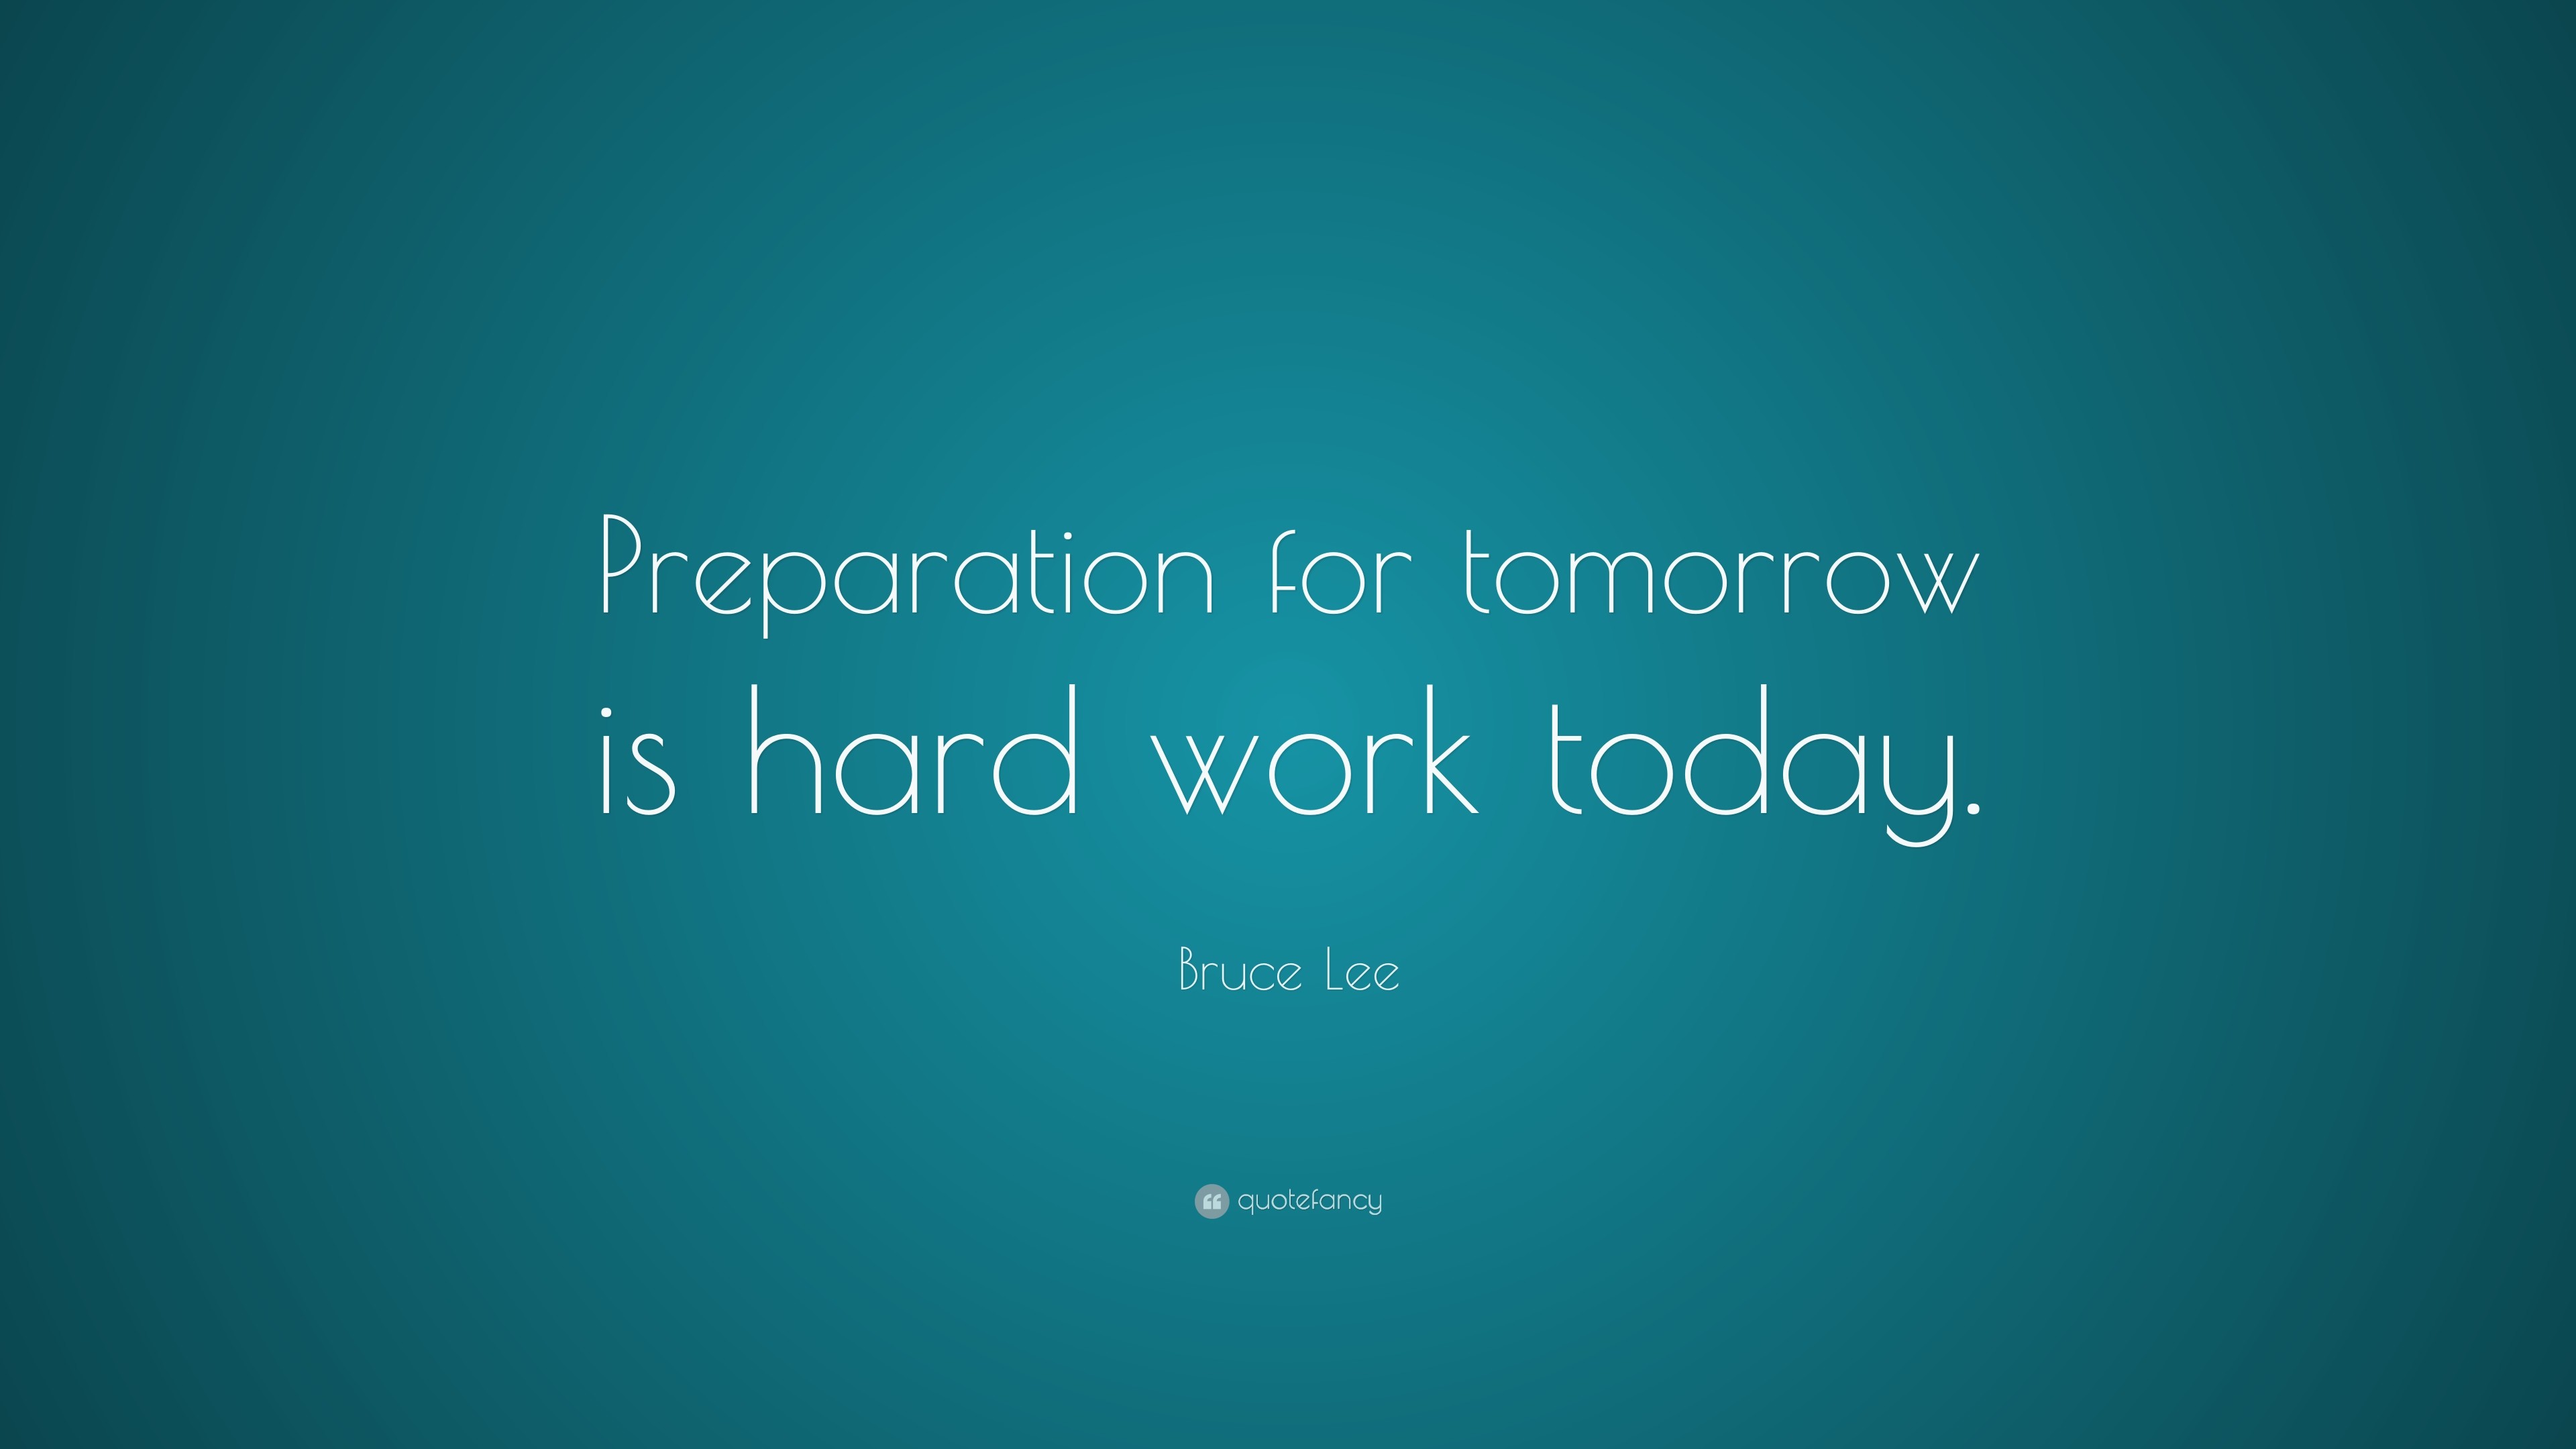 3840x2160 Bruce Lee Quote: “Preparation for tomorrow is hard work today.”